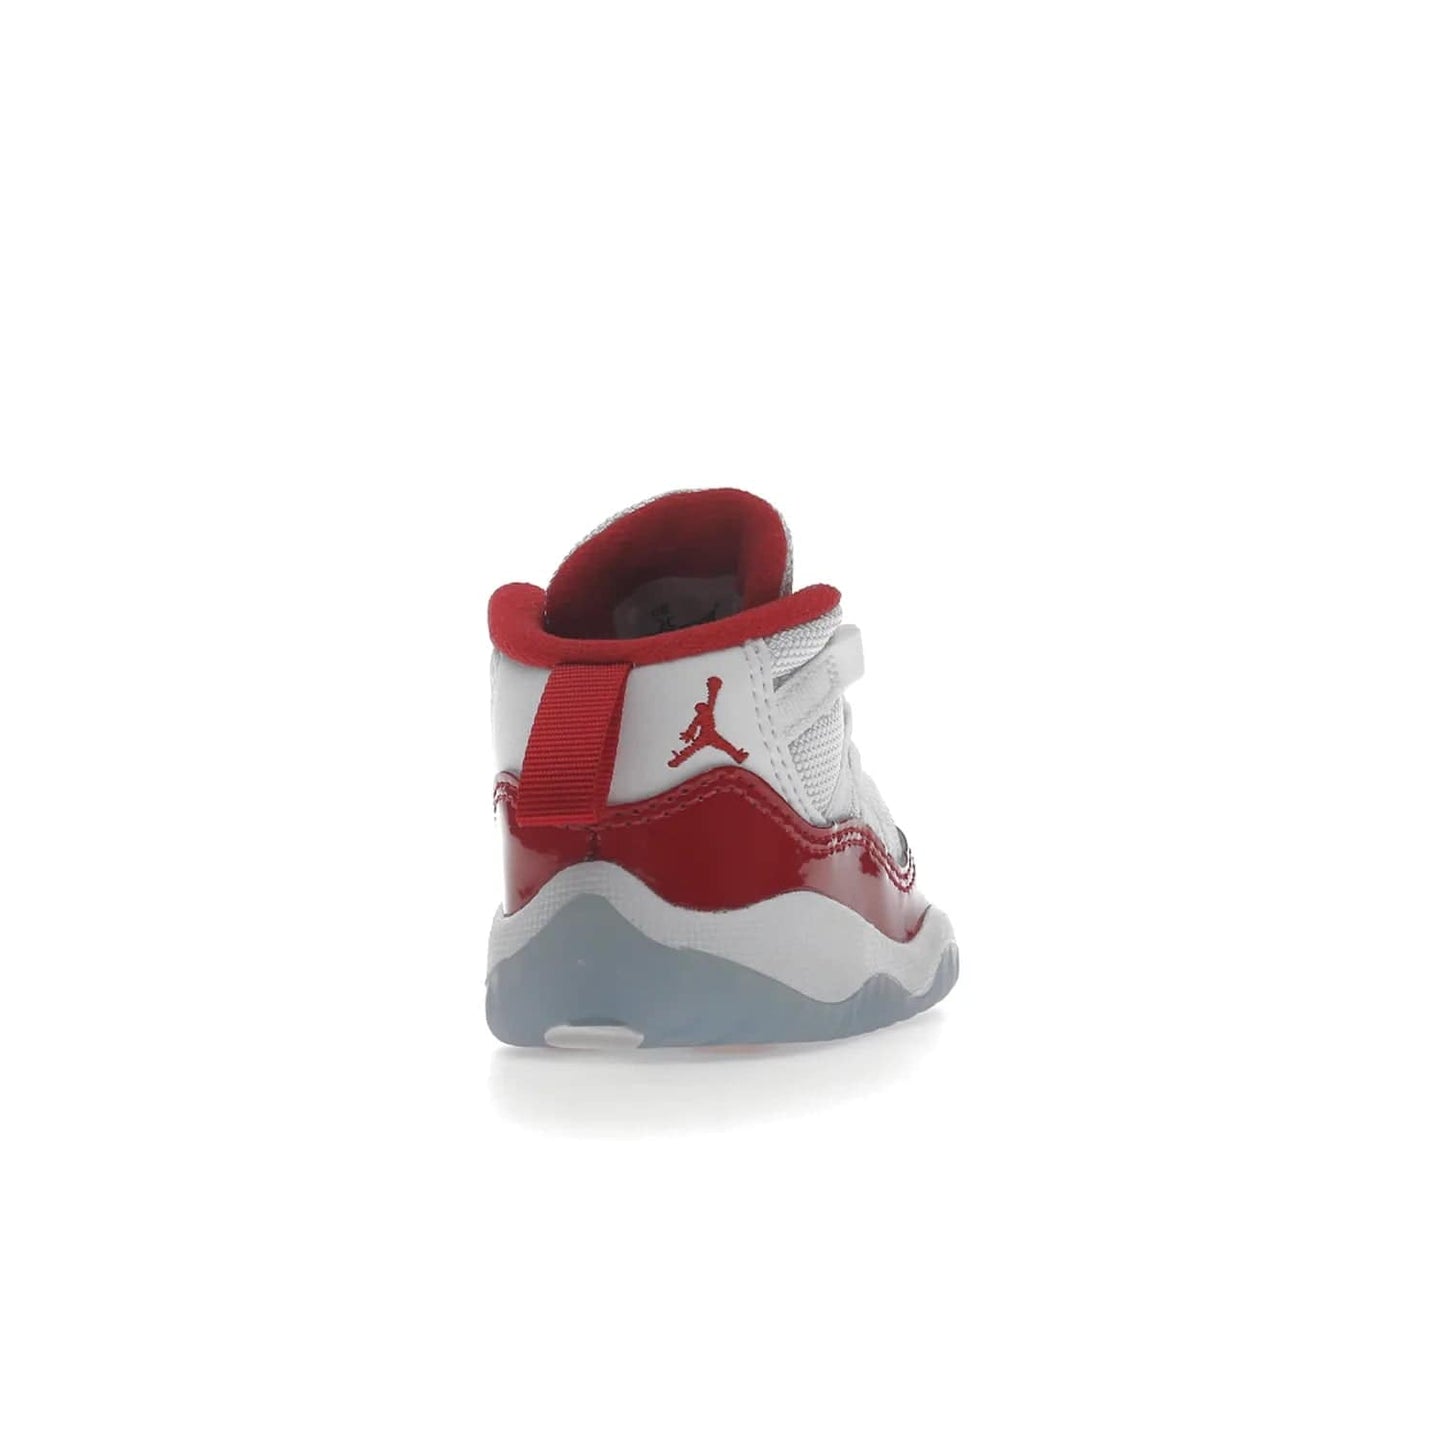 Jordan 11 Retro Cherry (2022) (TD) - Image 30 - Only at www.BallersClubKickz.com - Timeless classic. Air Jordan 11 Retro Cherry 2022 TD combines mesh, leather & suede for a unique look. White upper with varsity red suede. Jumpman logo on collar & tongue. Available Dec 10th, priced at $80.